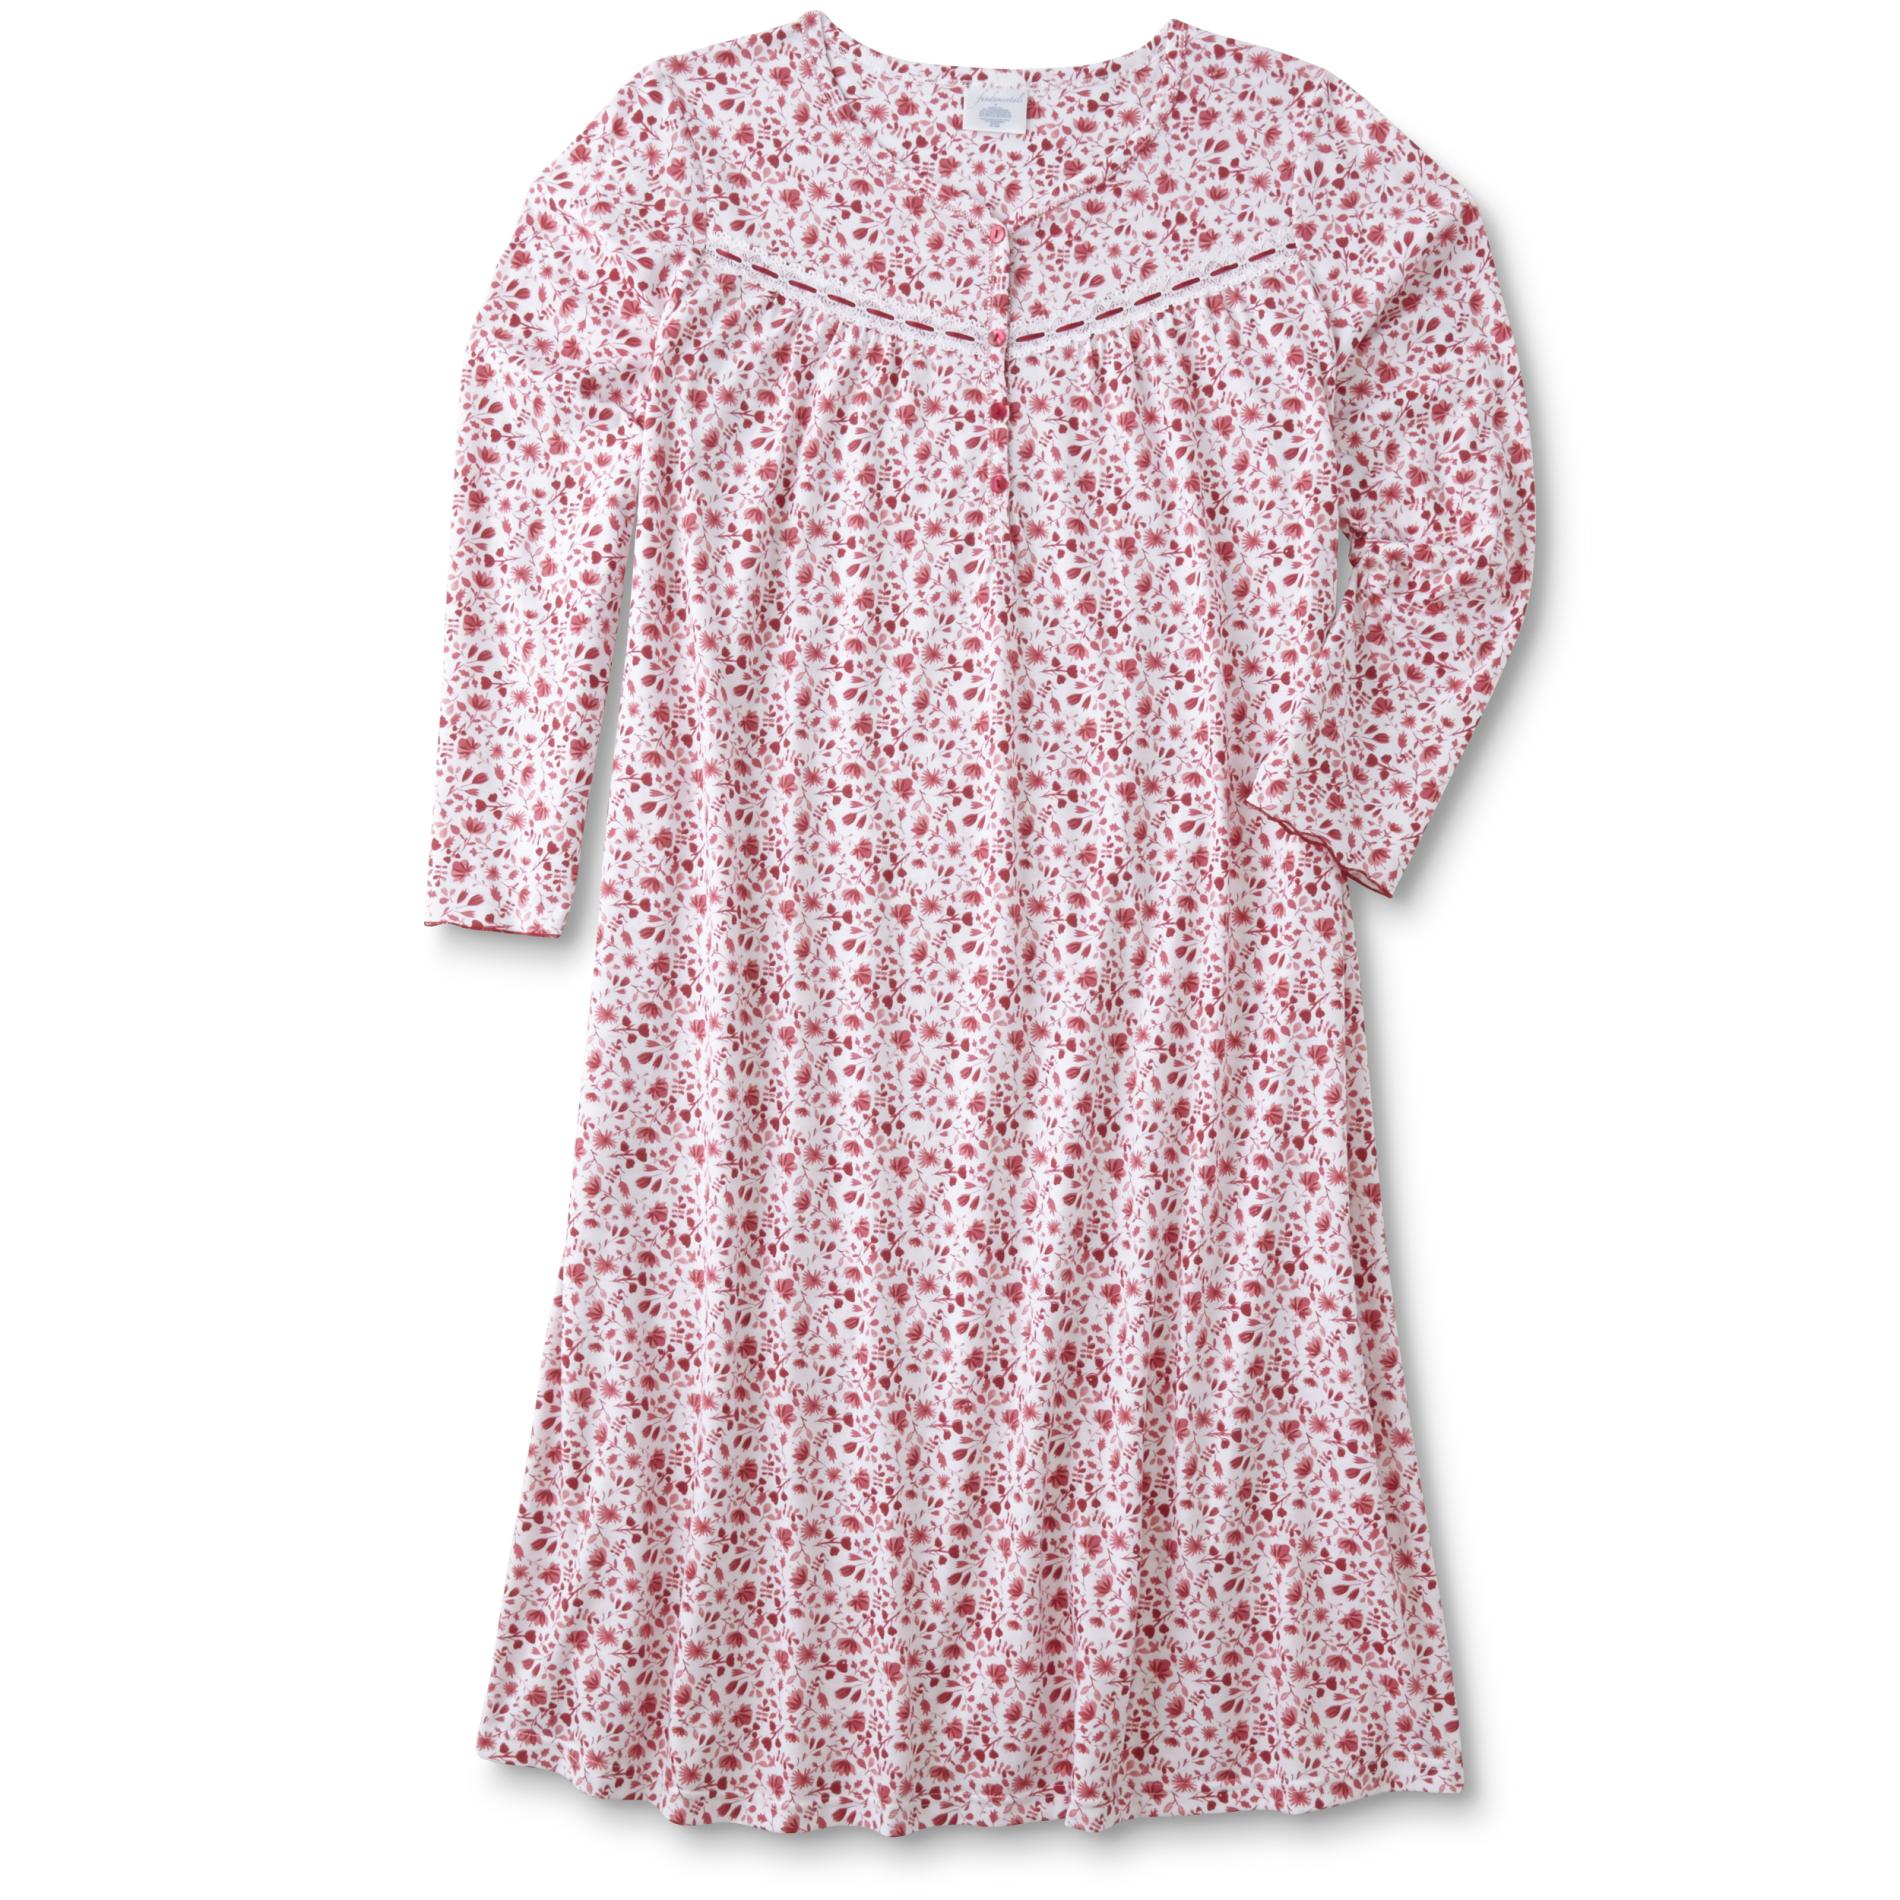 Fundamentals Women's Long-Sleeve Nightgown - Floral